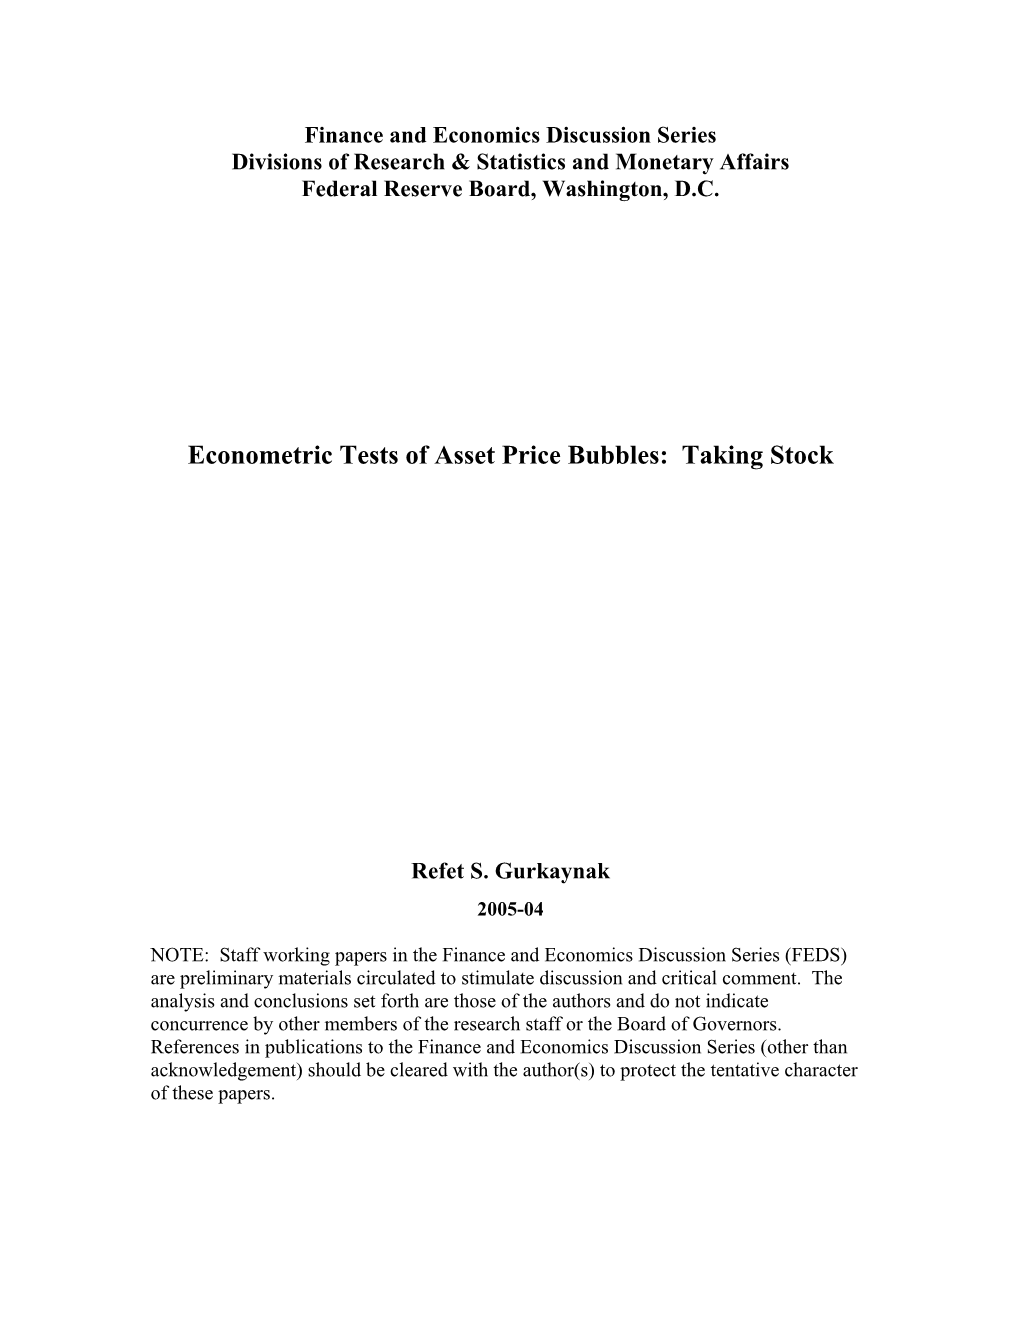 Econometric Tests of Asset Price Bubbles: Taking Stock